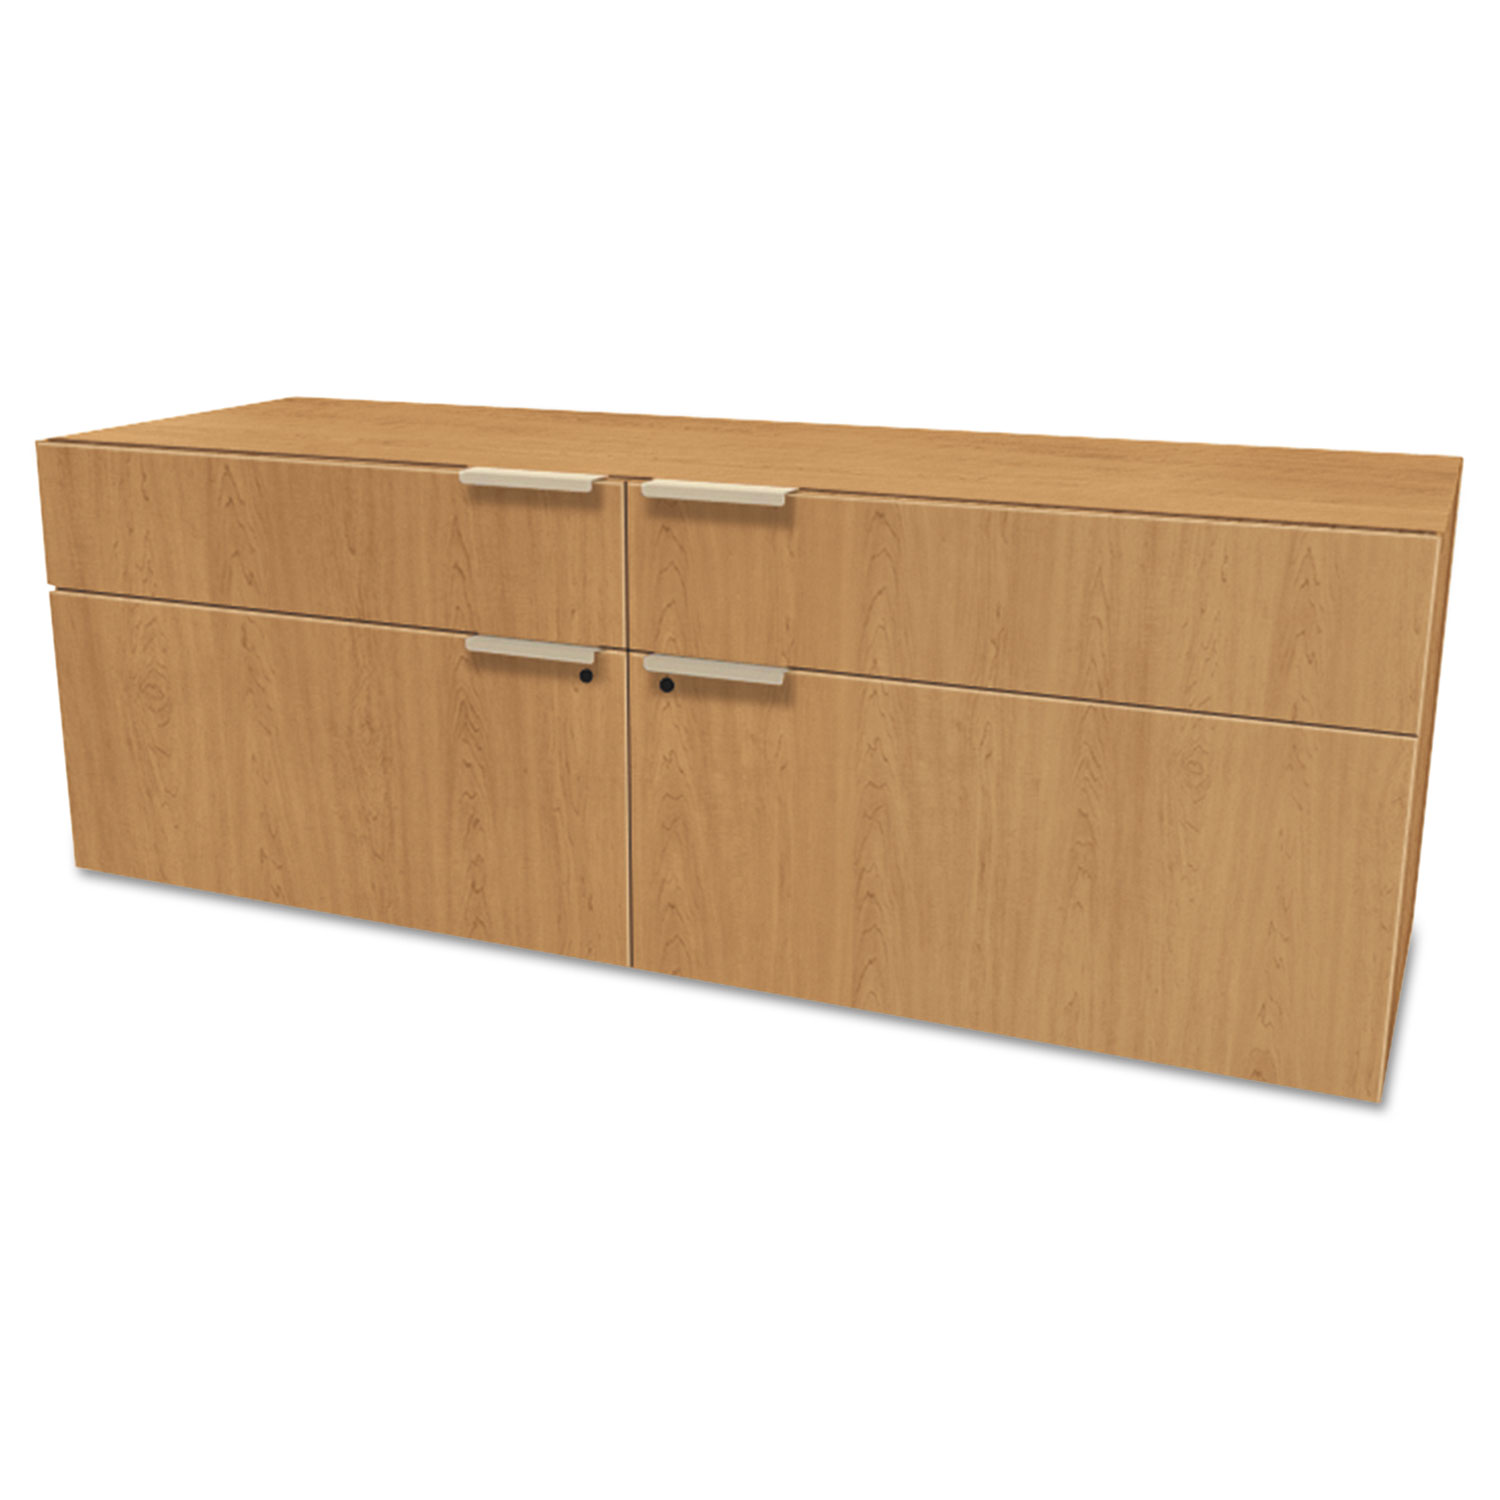 Voi Low Credenza, 2 Box/2 File Drawers, 60w x 20d x 21 1/2h, Harvest